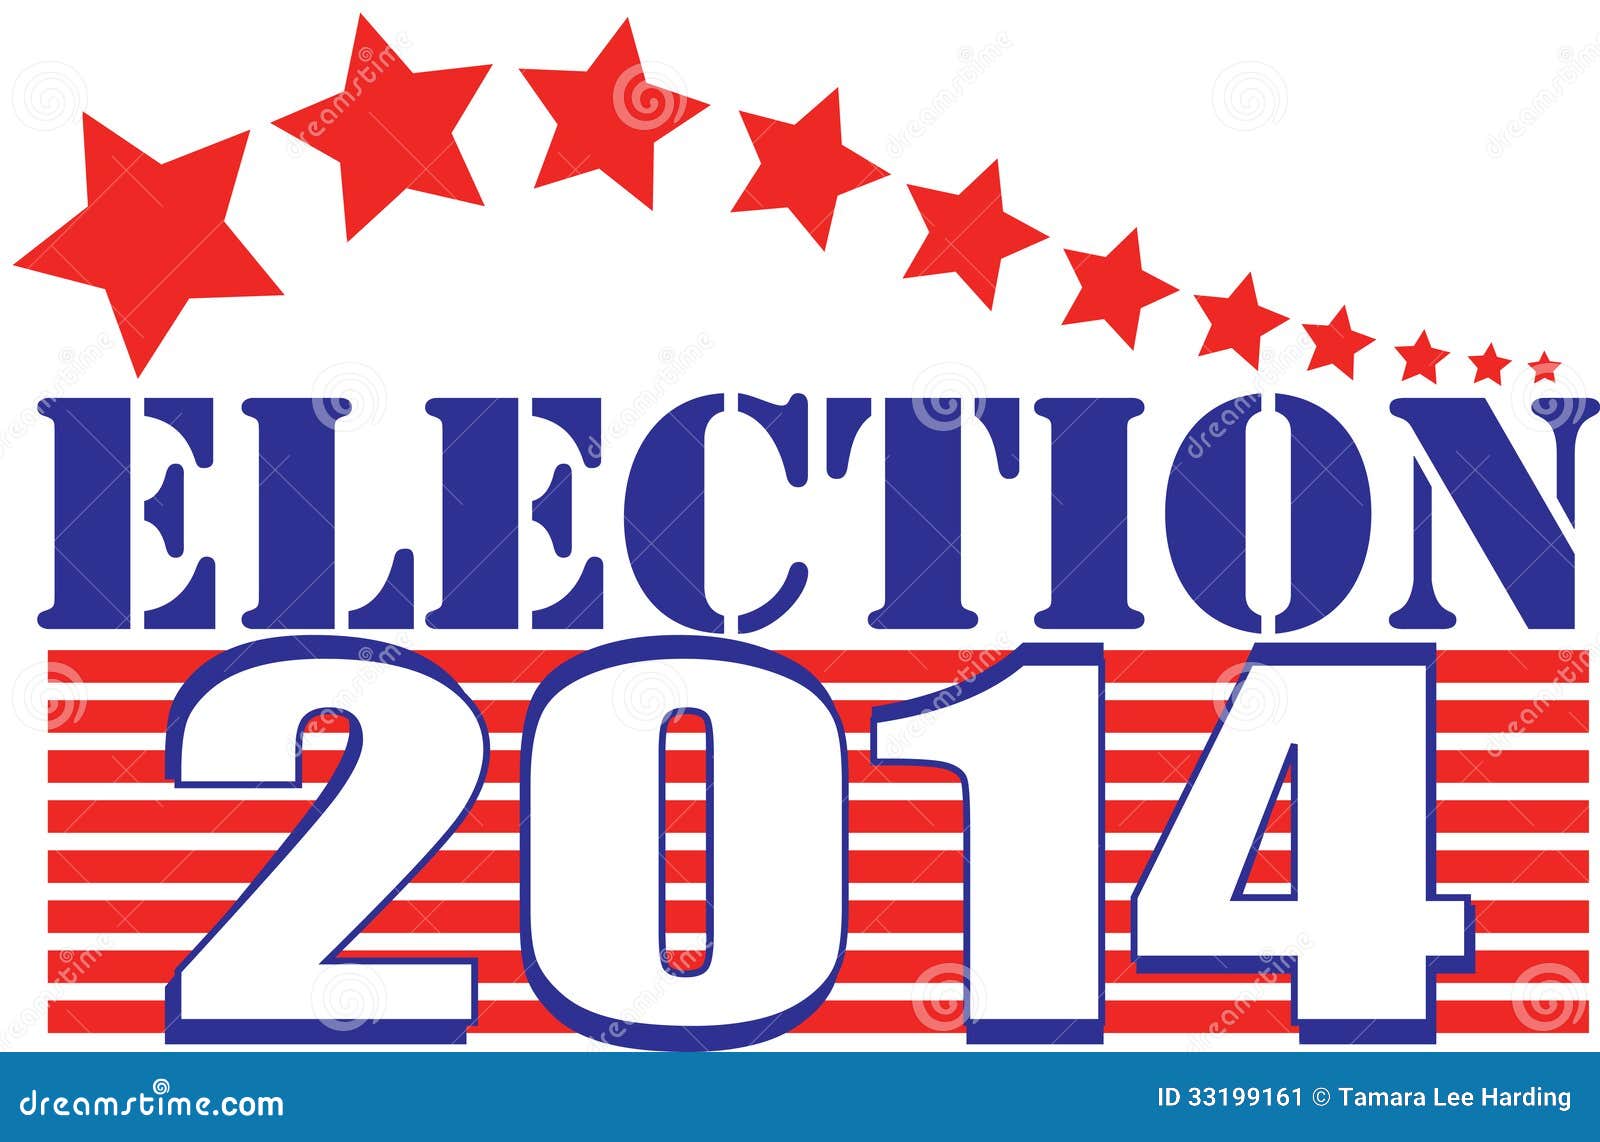 Election 2014 for United States Senate and Congress and other state 